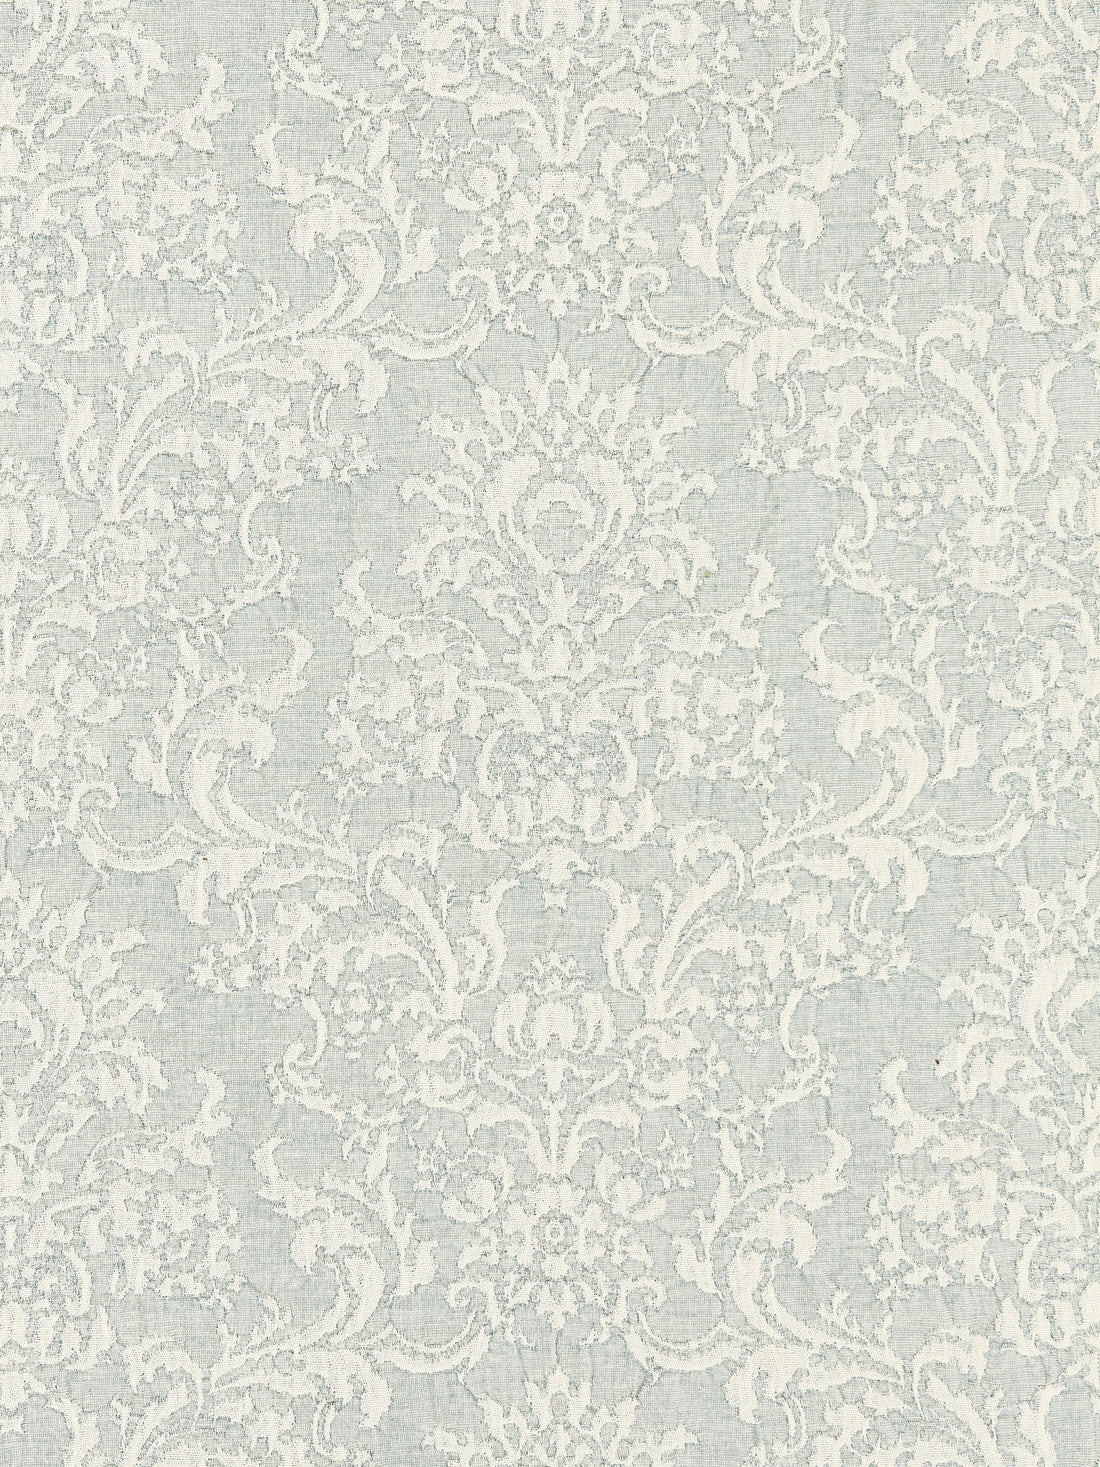 San Luca Damask fabric in rain color - pattern number SC 000227094 - by Scalamandre in the Scalamandre Fabrics Book 1 collection